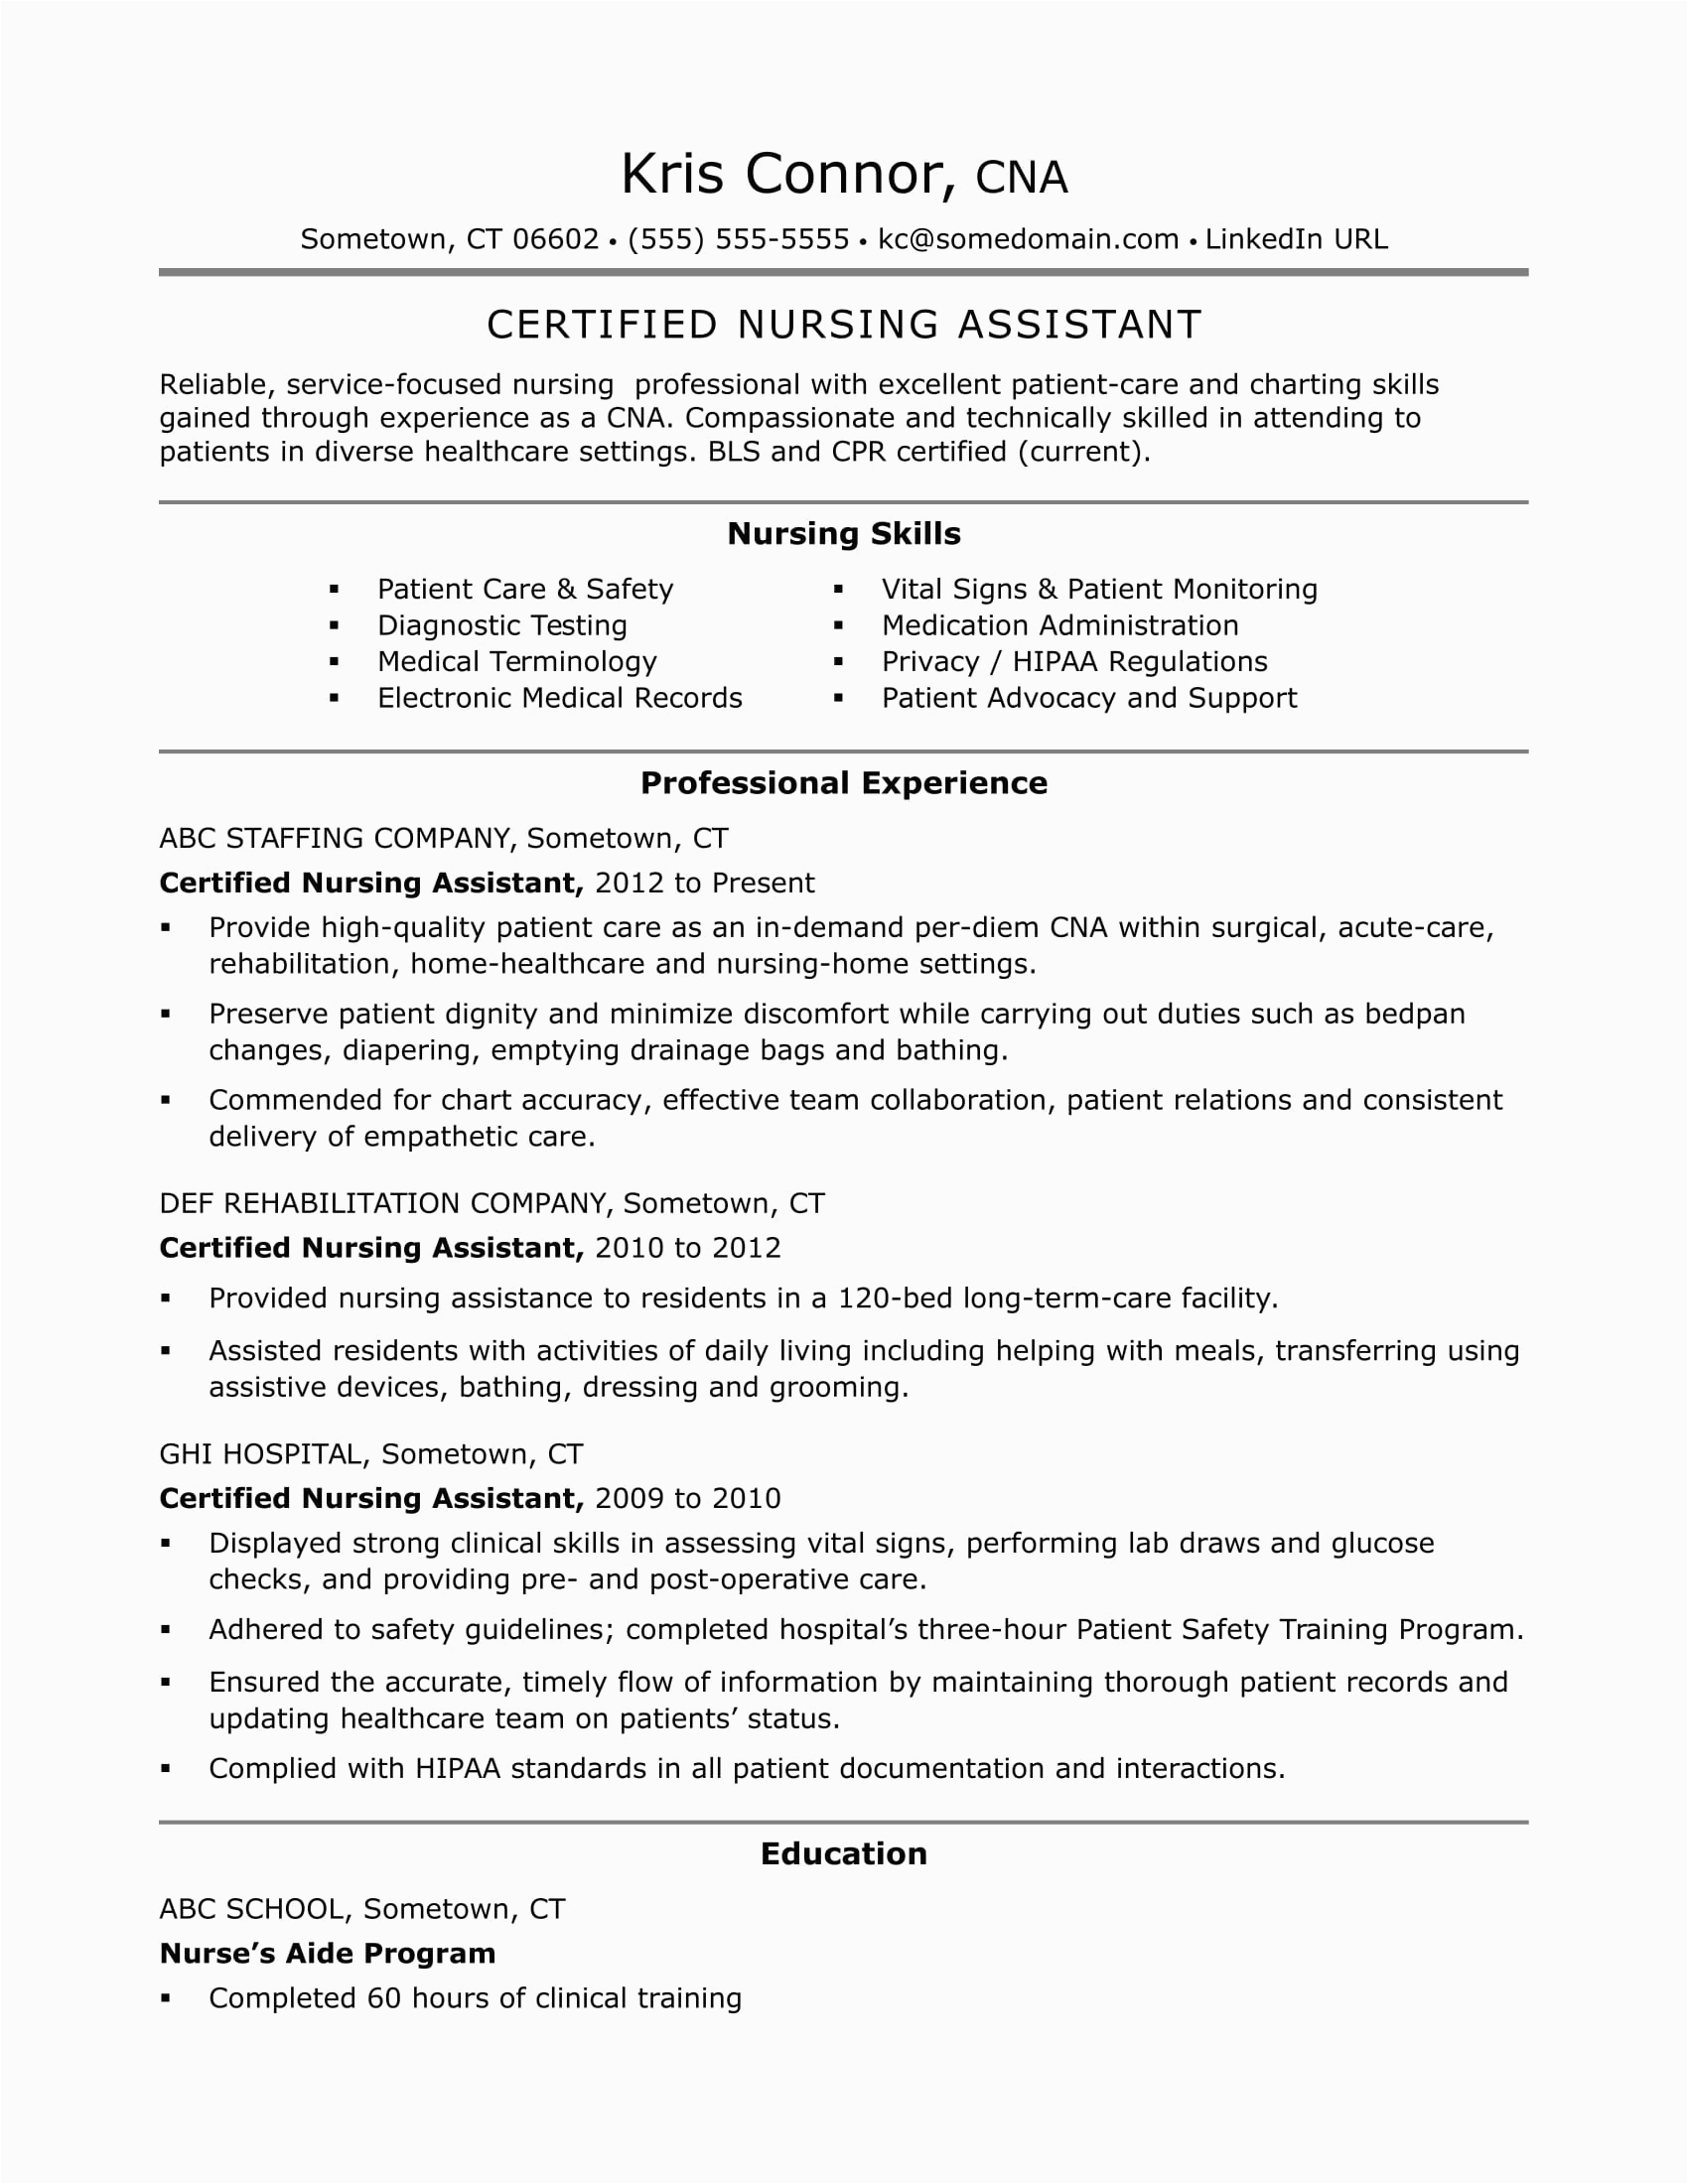 Free Certified Nursing assistant Resume Template Cna Resume Examples Skills for Cnas